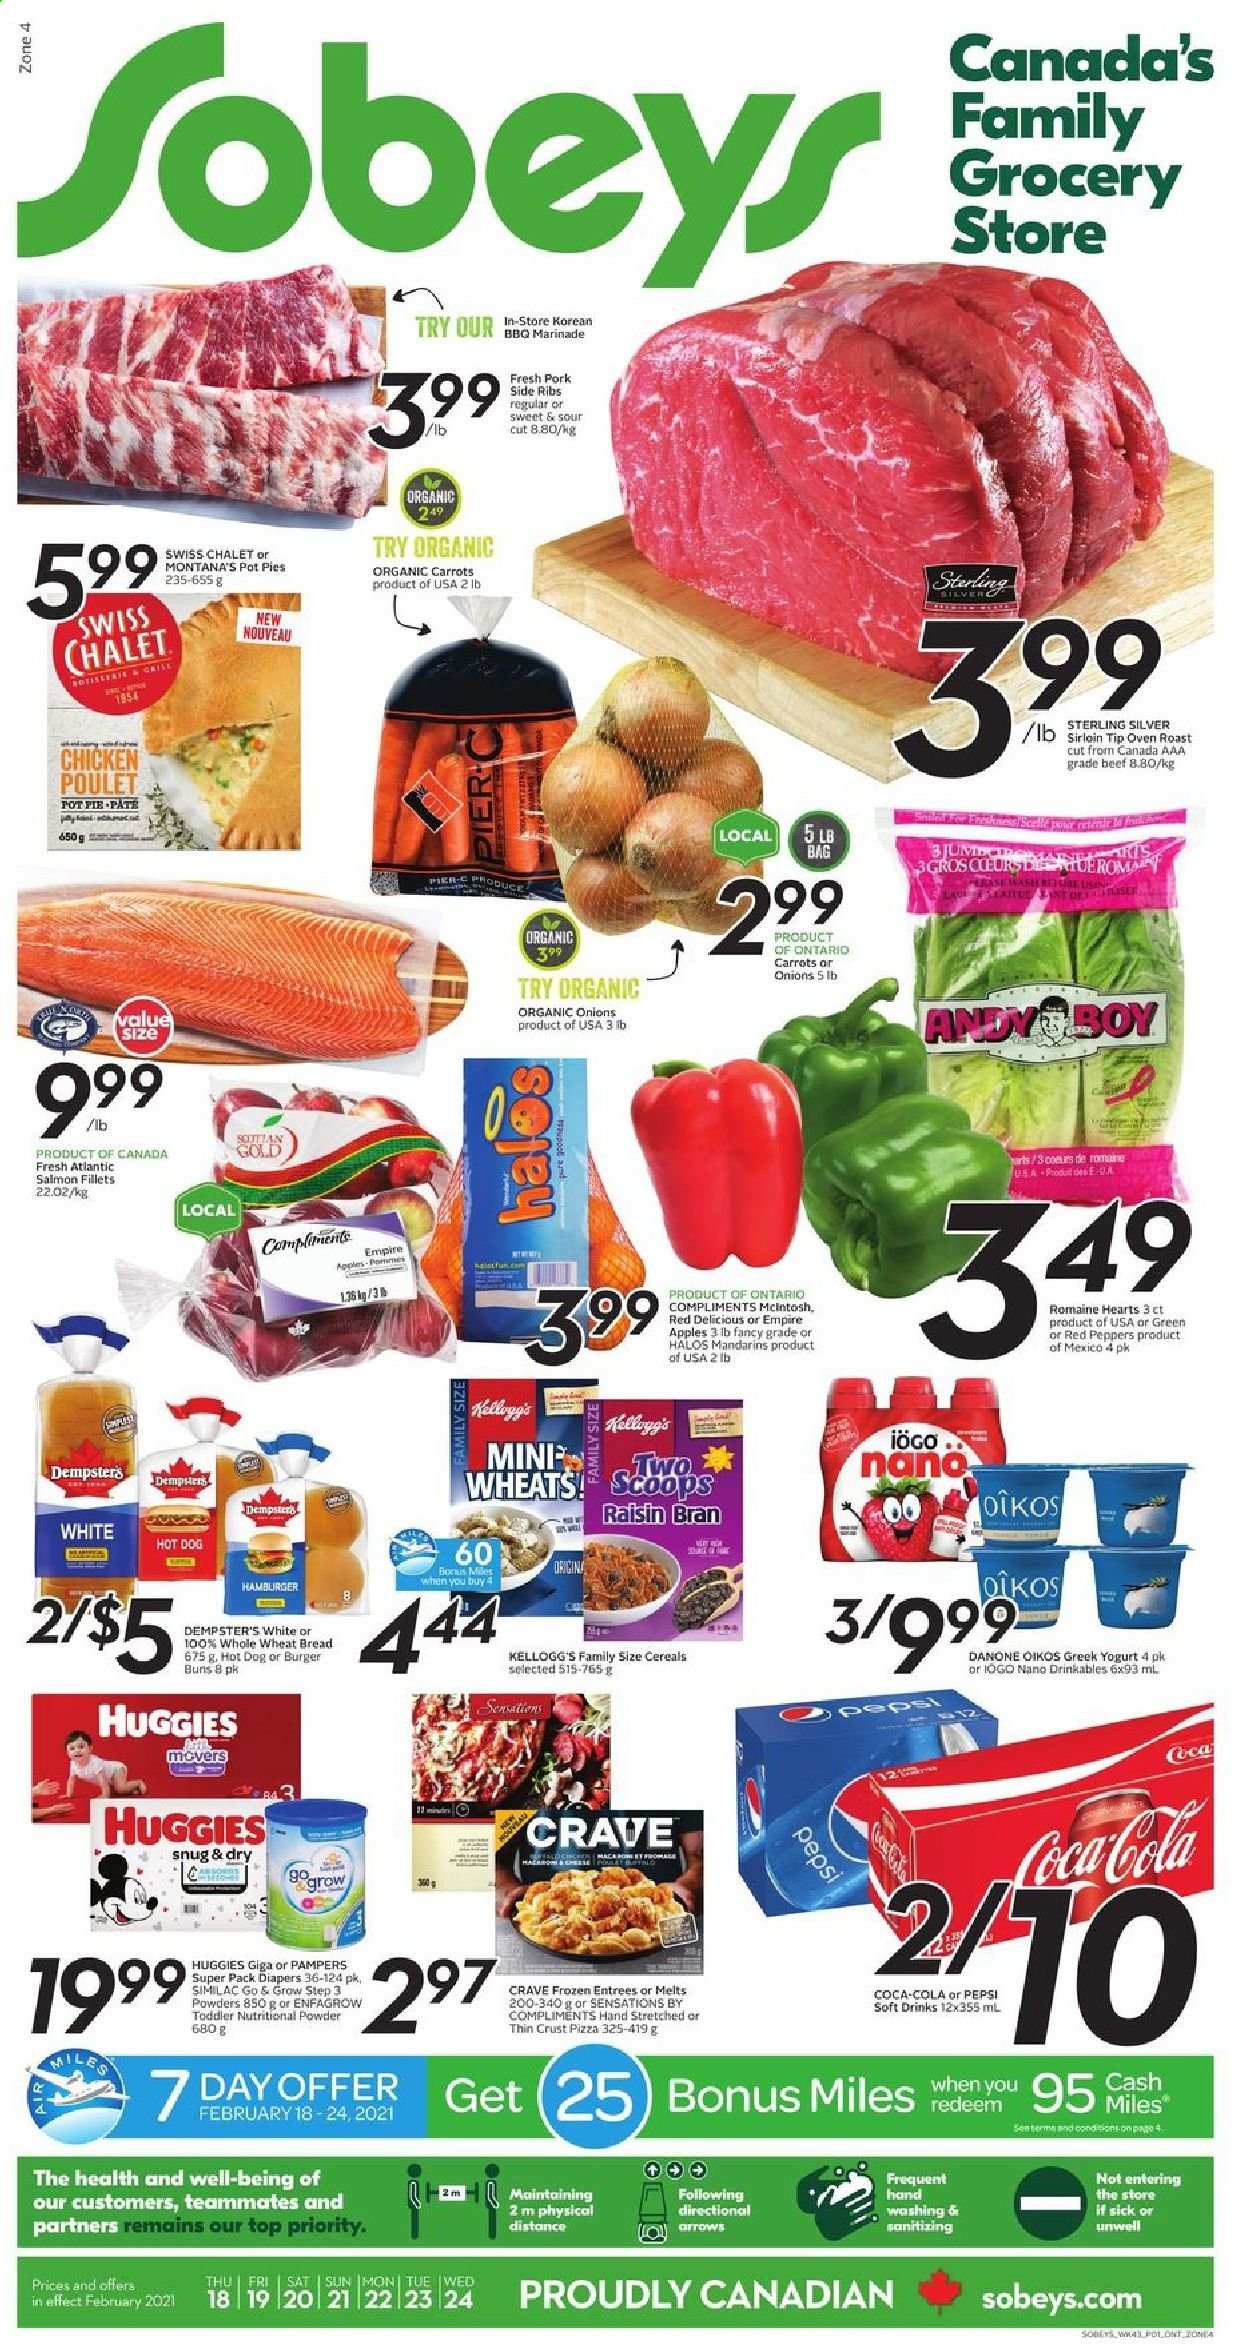 thumbnail - Sobeys Flyer - February 18, 2021 - February 24, 2021 - Sales products - wheat bread, pie, buns, burger buns, pot pie, carrots, onion, peppers, red peppers, apples, mandarines, Red Delicious apples, salmon, salmon fillet, hot dog, pizza, greek yoghurt, yoghurt, Oikos, Kellogg's, Raisin Bran, marinade, Coca-Cola, Pepsi, soft drink, Similac, nappies, Danone, Huggies, Pampers. Page 1.